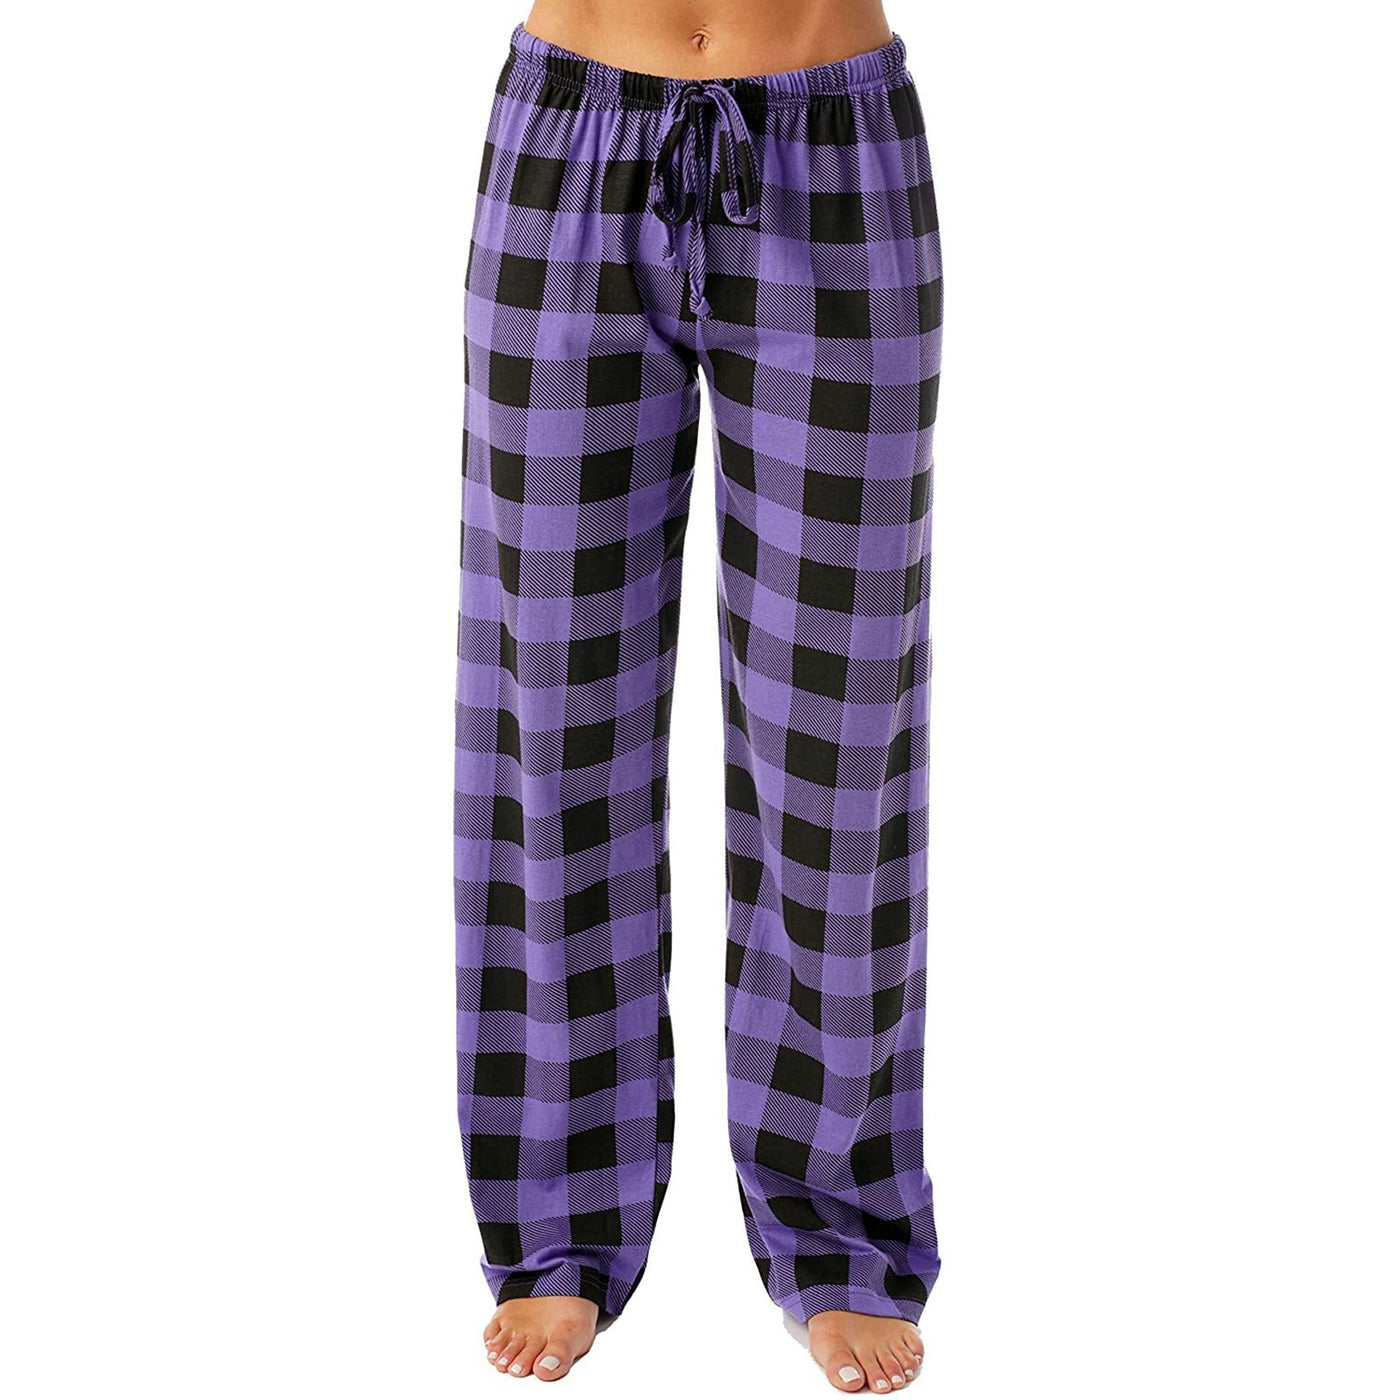 Trendy Checkered Pants for Casual Wear - Plaid Design - Carvan Mart